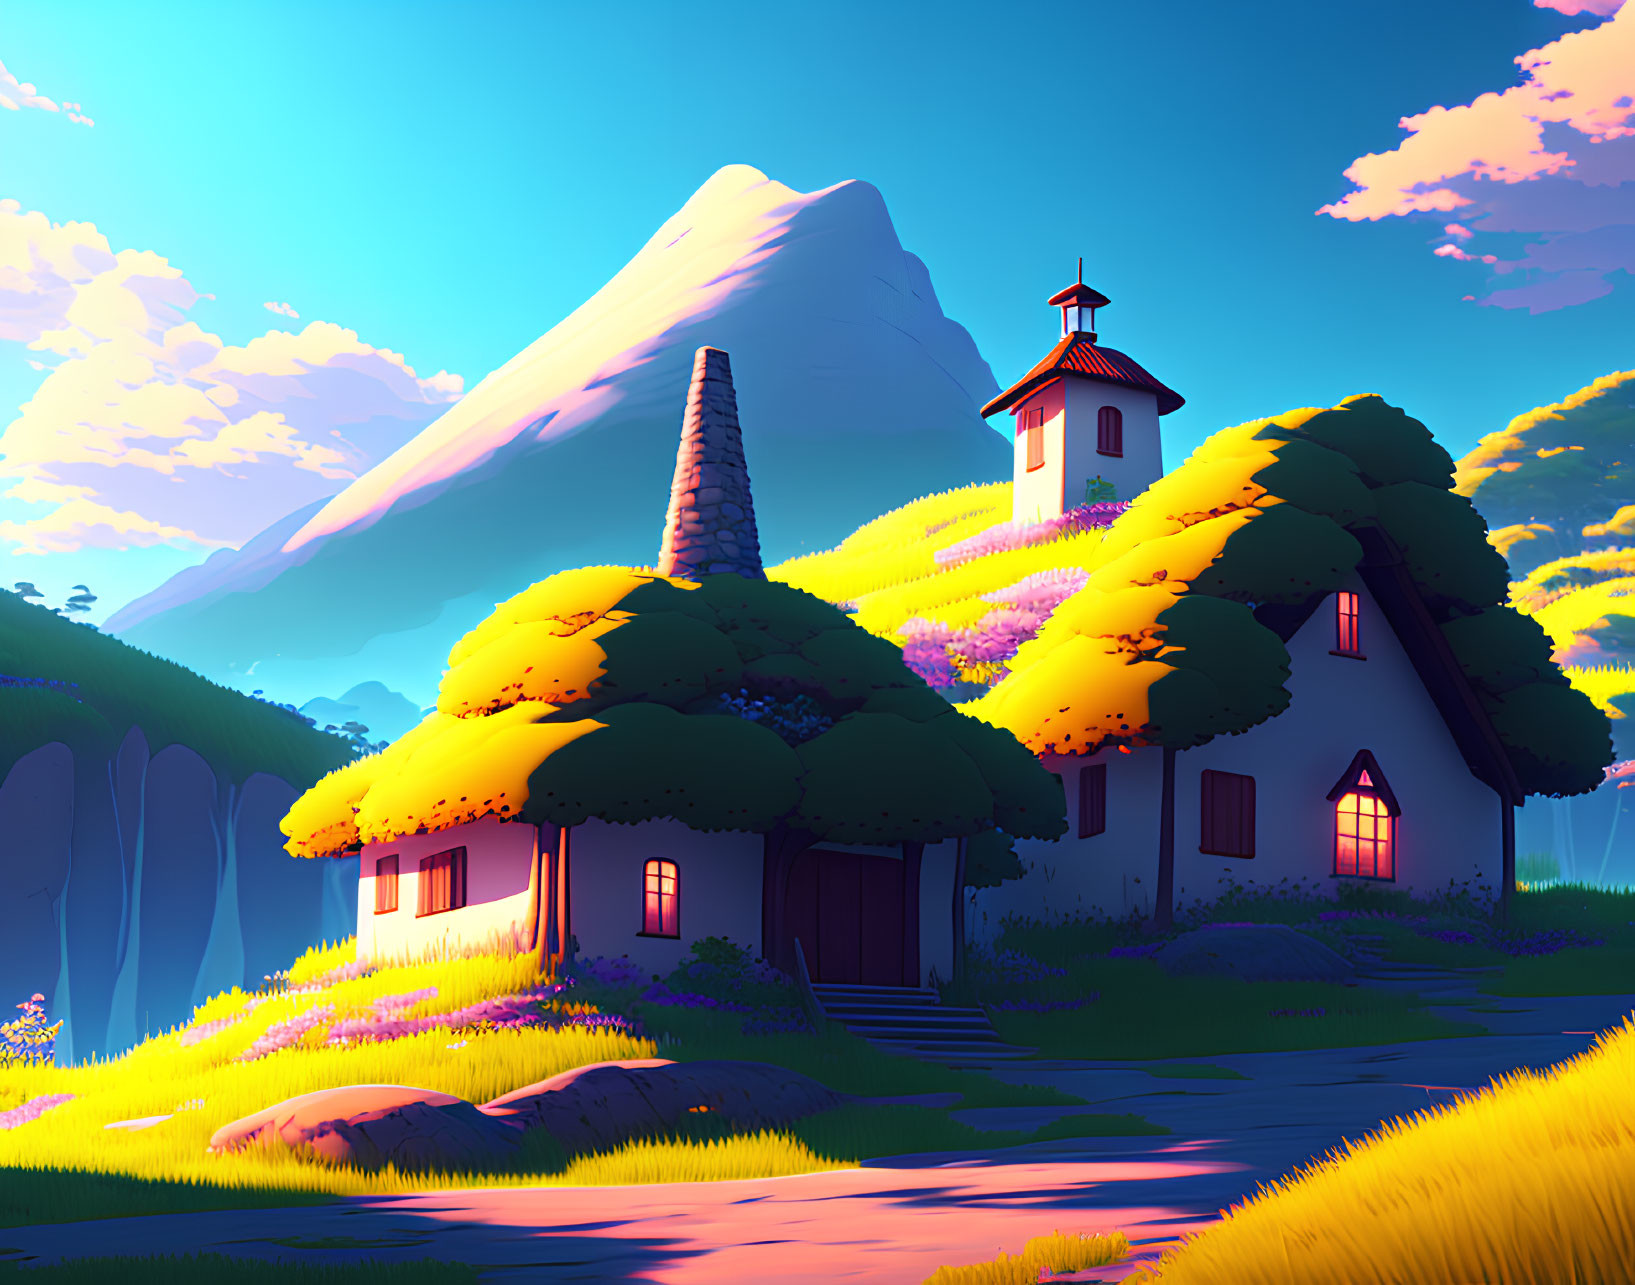 Whimsical landscape with cozy houses and mountain under clear sky